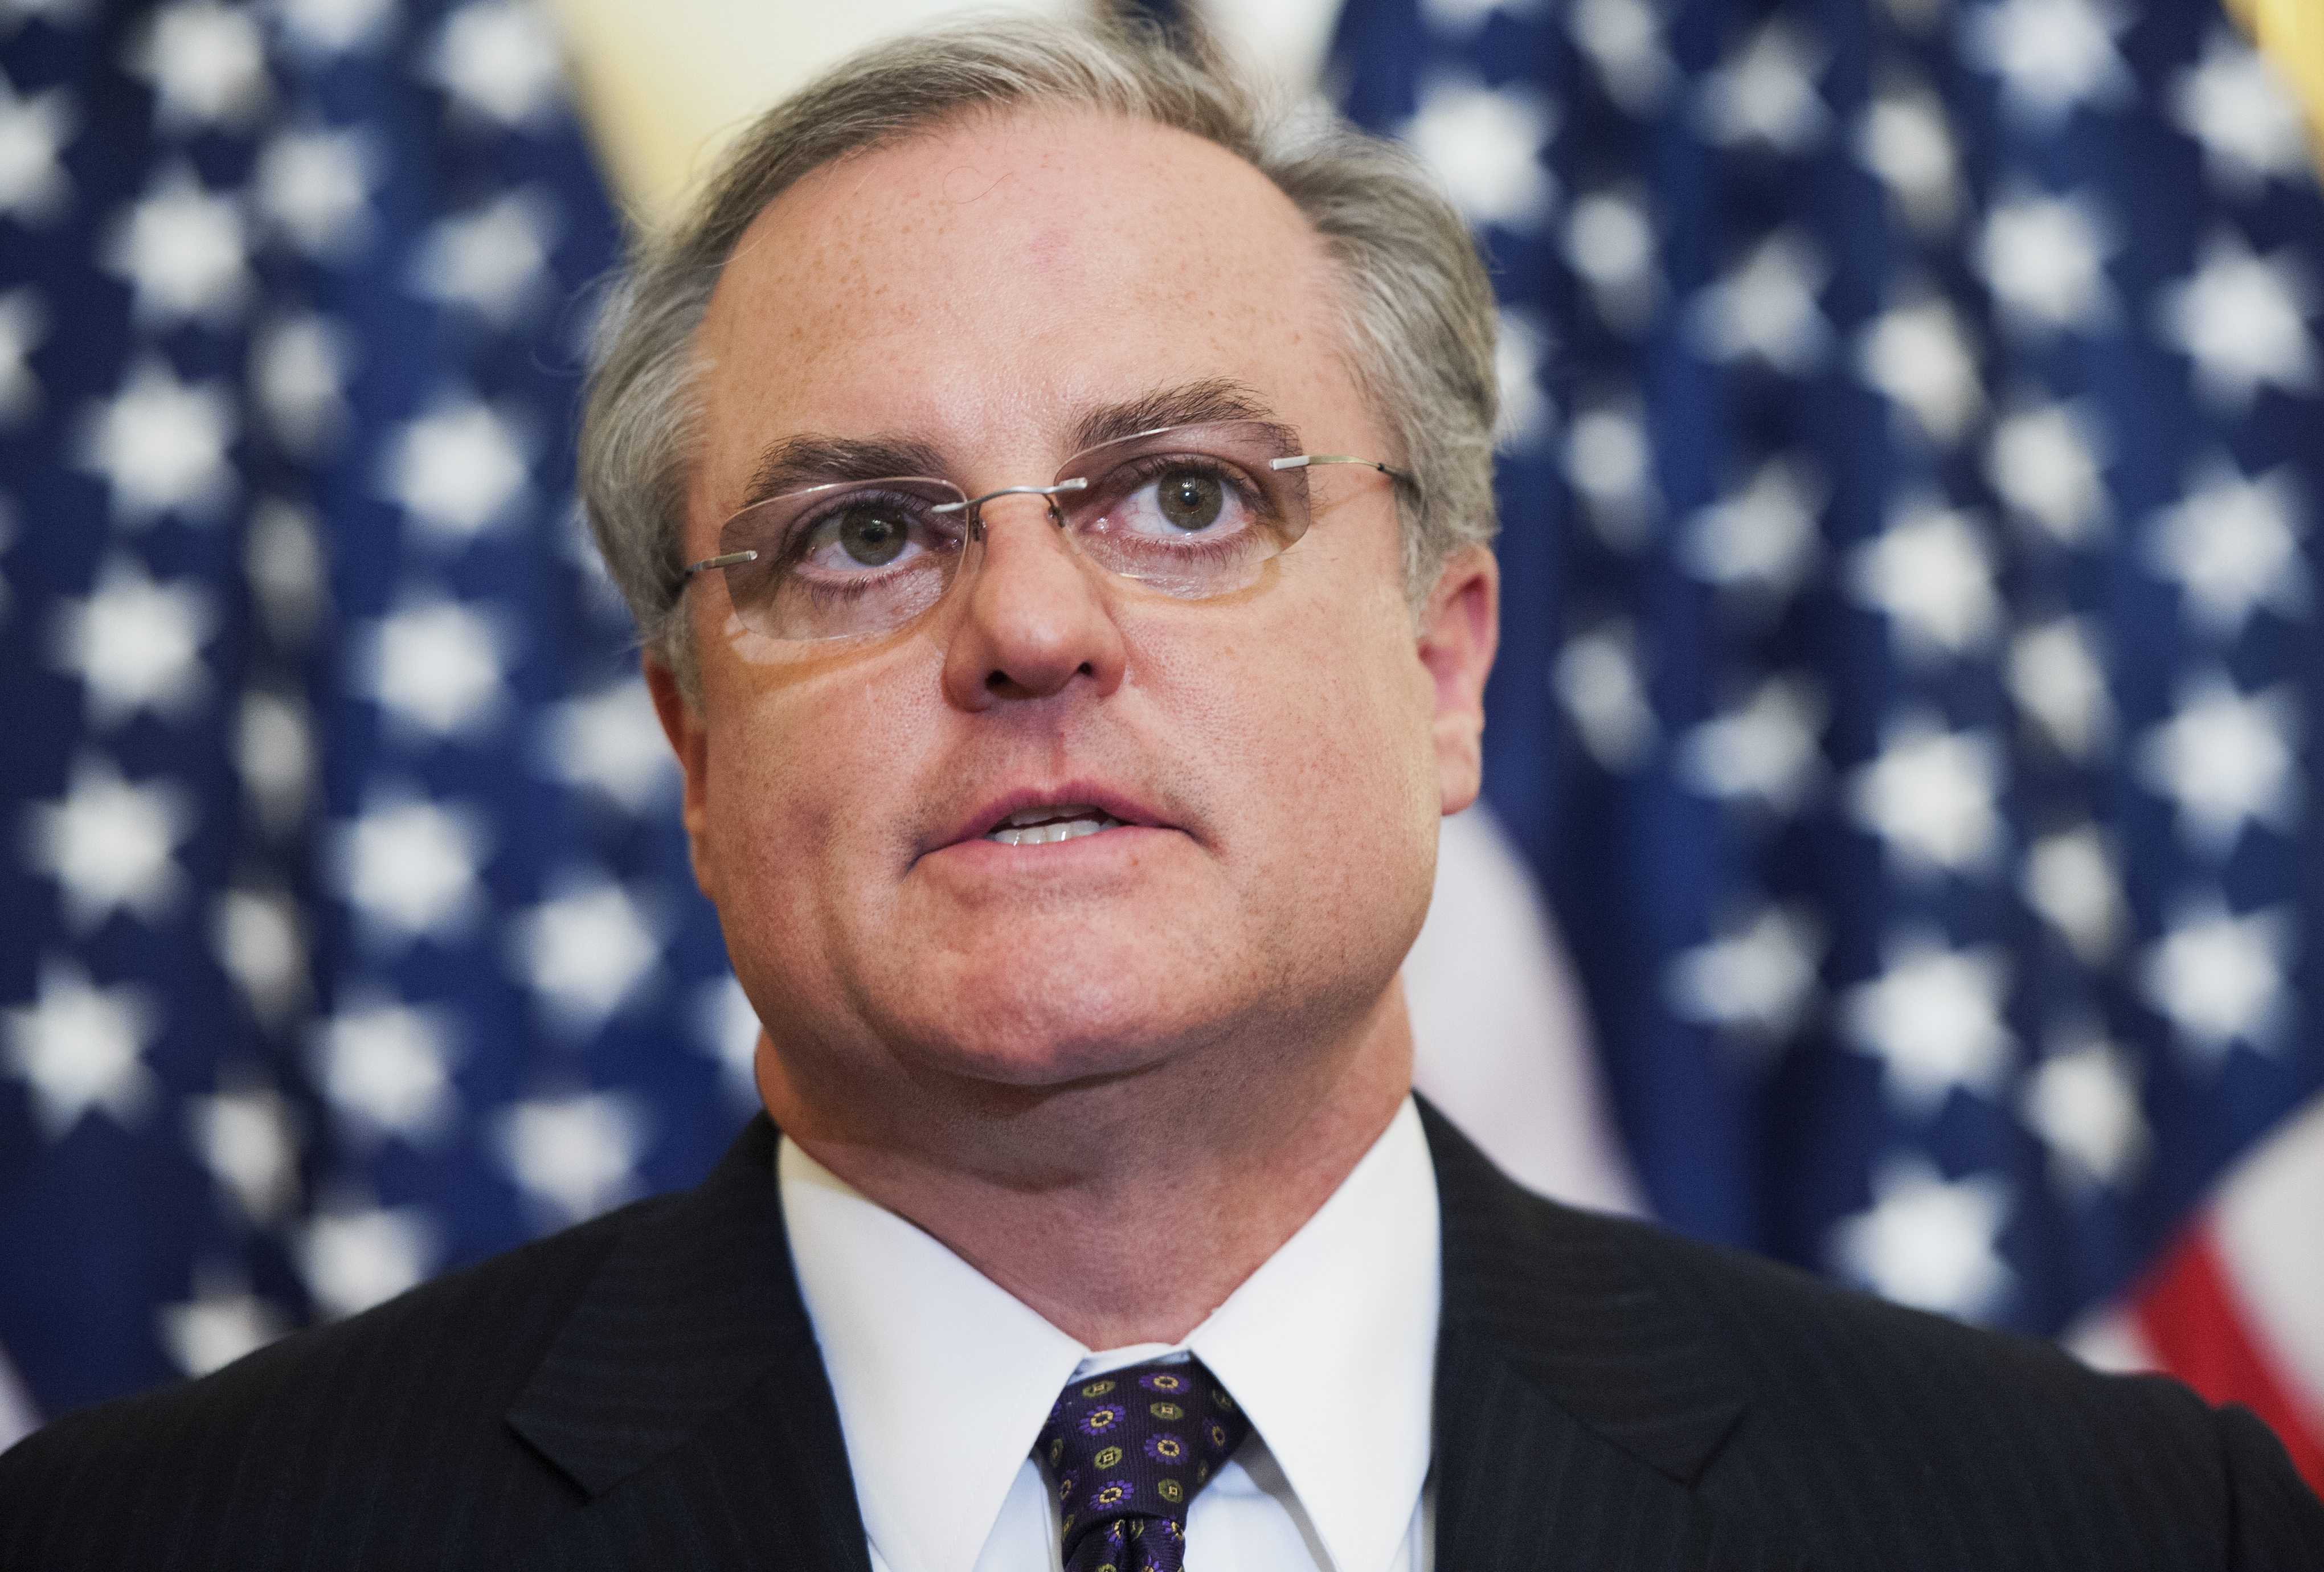 Sen. Mark Pryor, D-Ark., conducts a news conference in the Capitol to urge passage of legislation that would bring outsourced jobs back to the United States, July 22, 2014. (Tom Williams—CQ-Roll Call,Inc.)